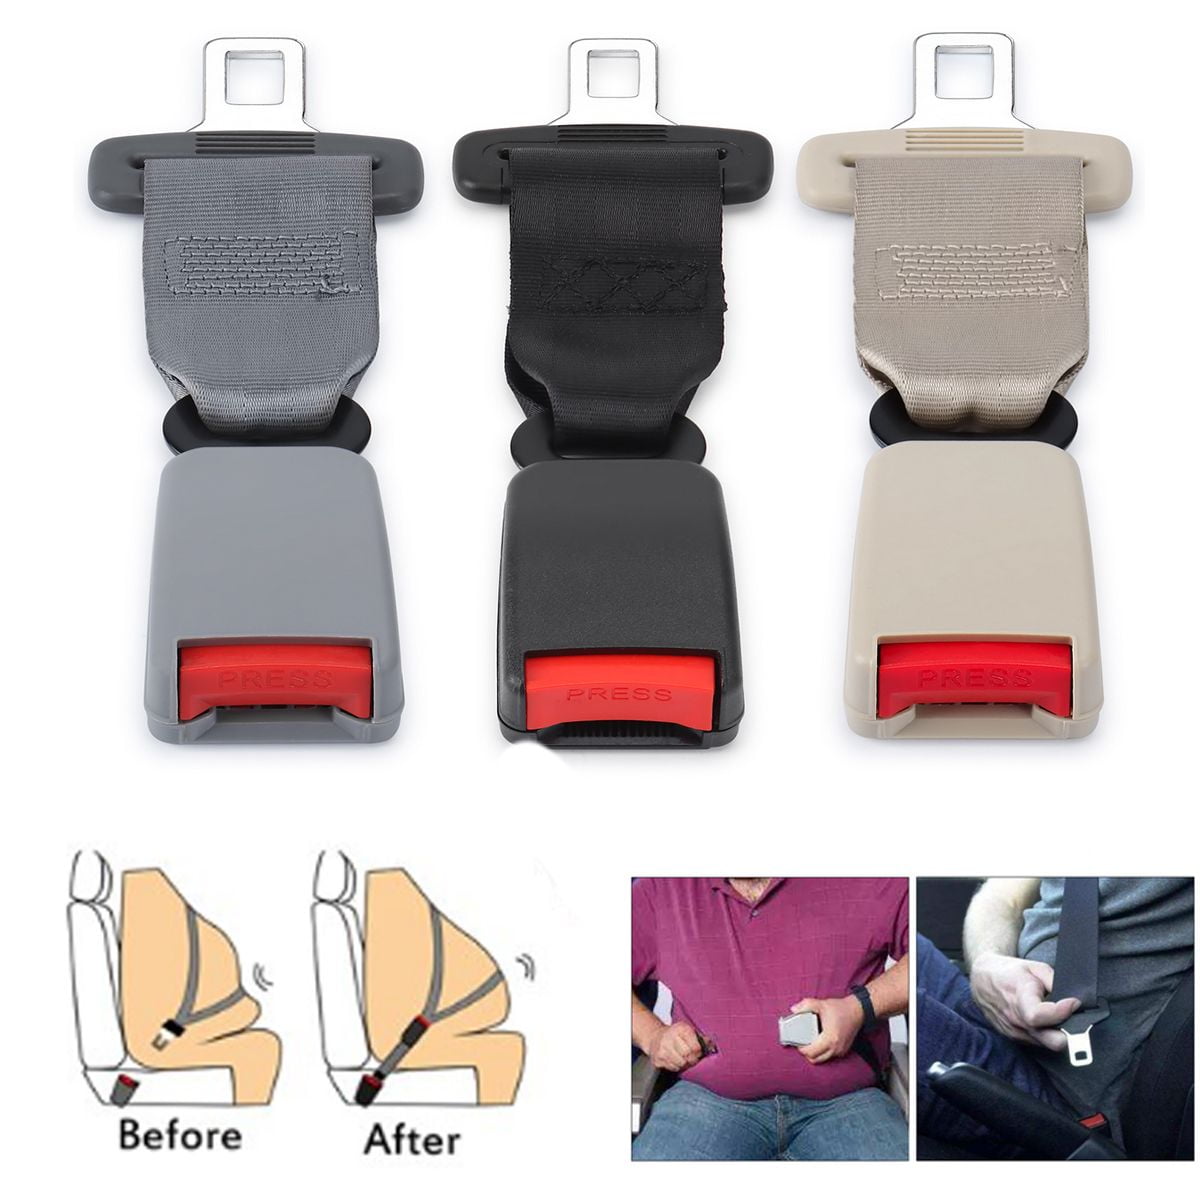 2 Pack Vehicle Specific Belt Extension Seat Belt Extender Black Seatbelt Buckle 7/8 inch Metal Tongue Seat Belt Extension for Obese Men Pregnant Women Child Safety Seats Suitable for Most Cars 